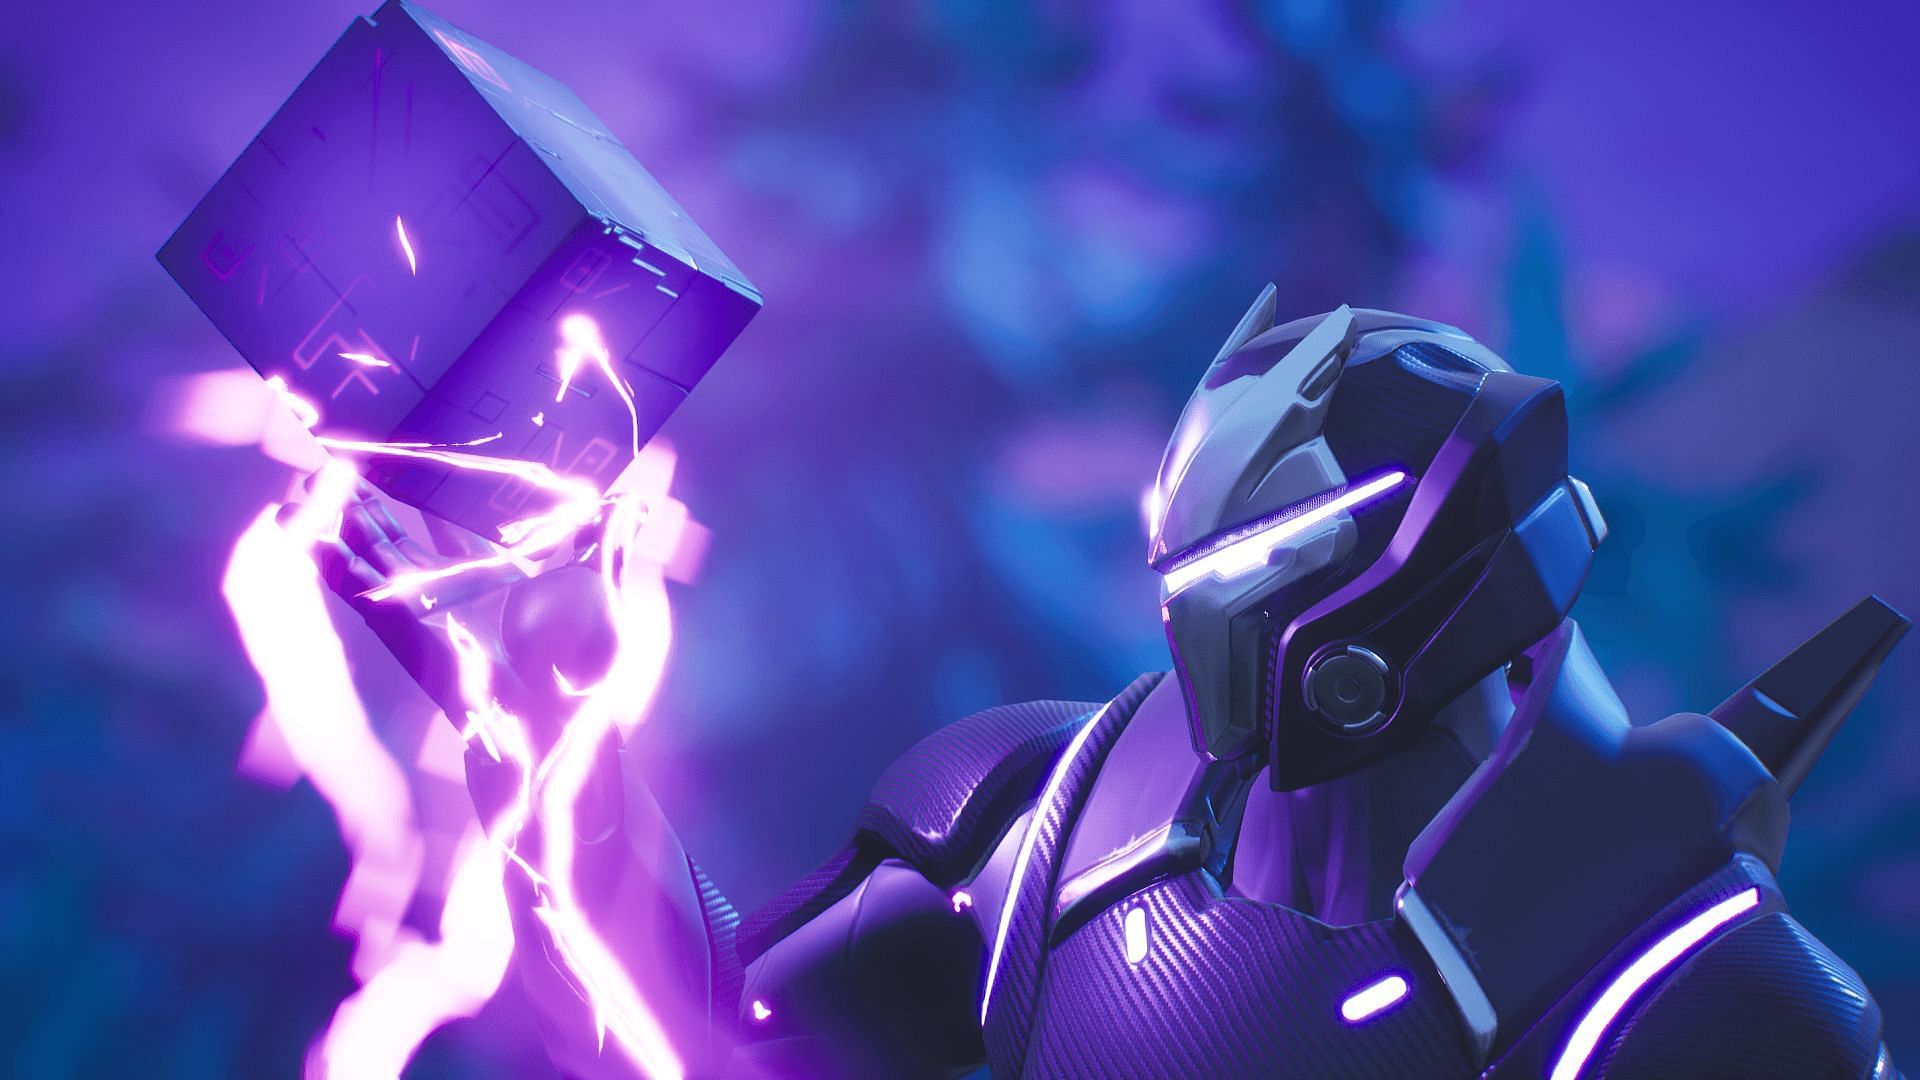 Fortnite concept art gives players the chance to unlock Omega Lights